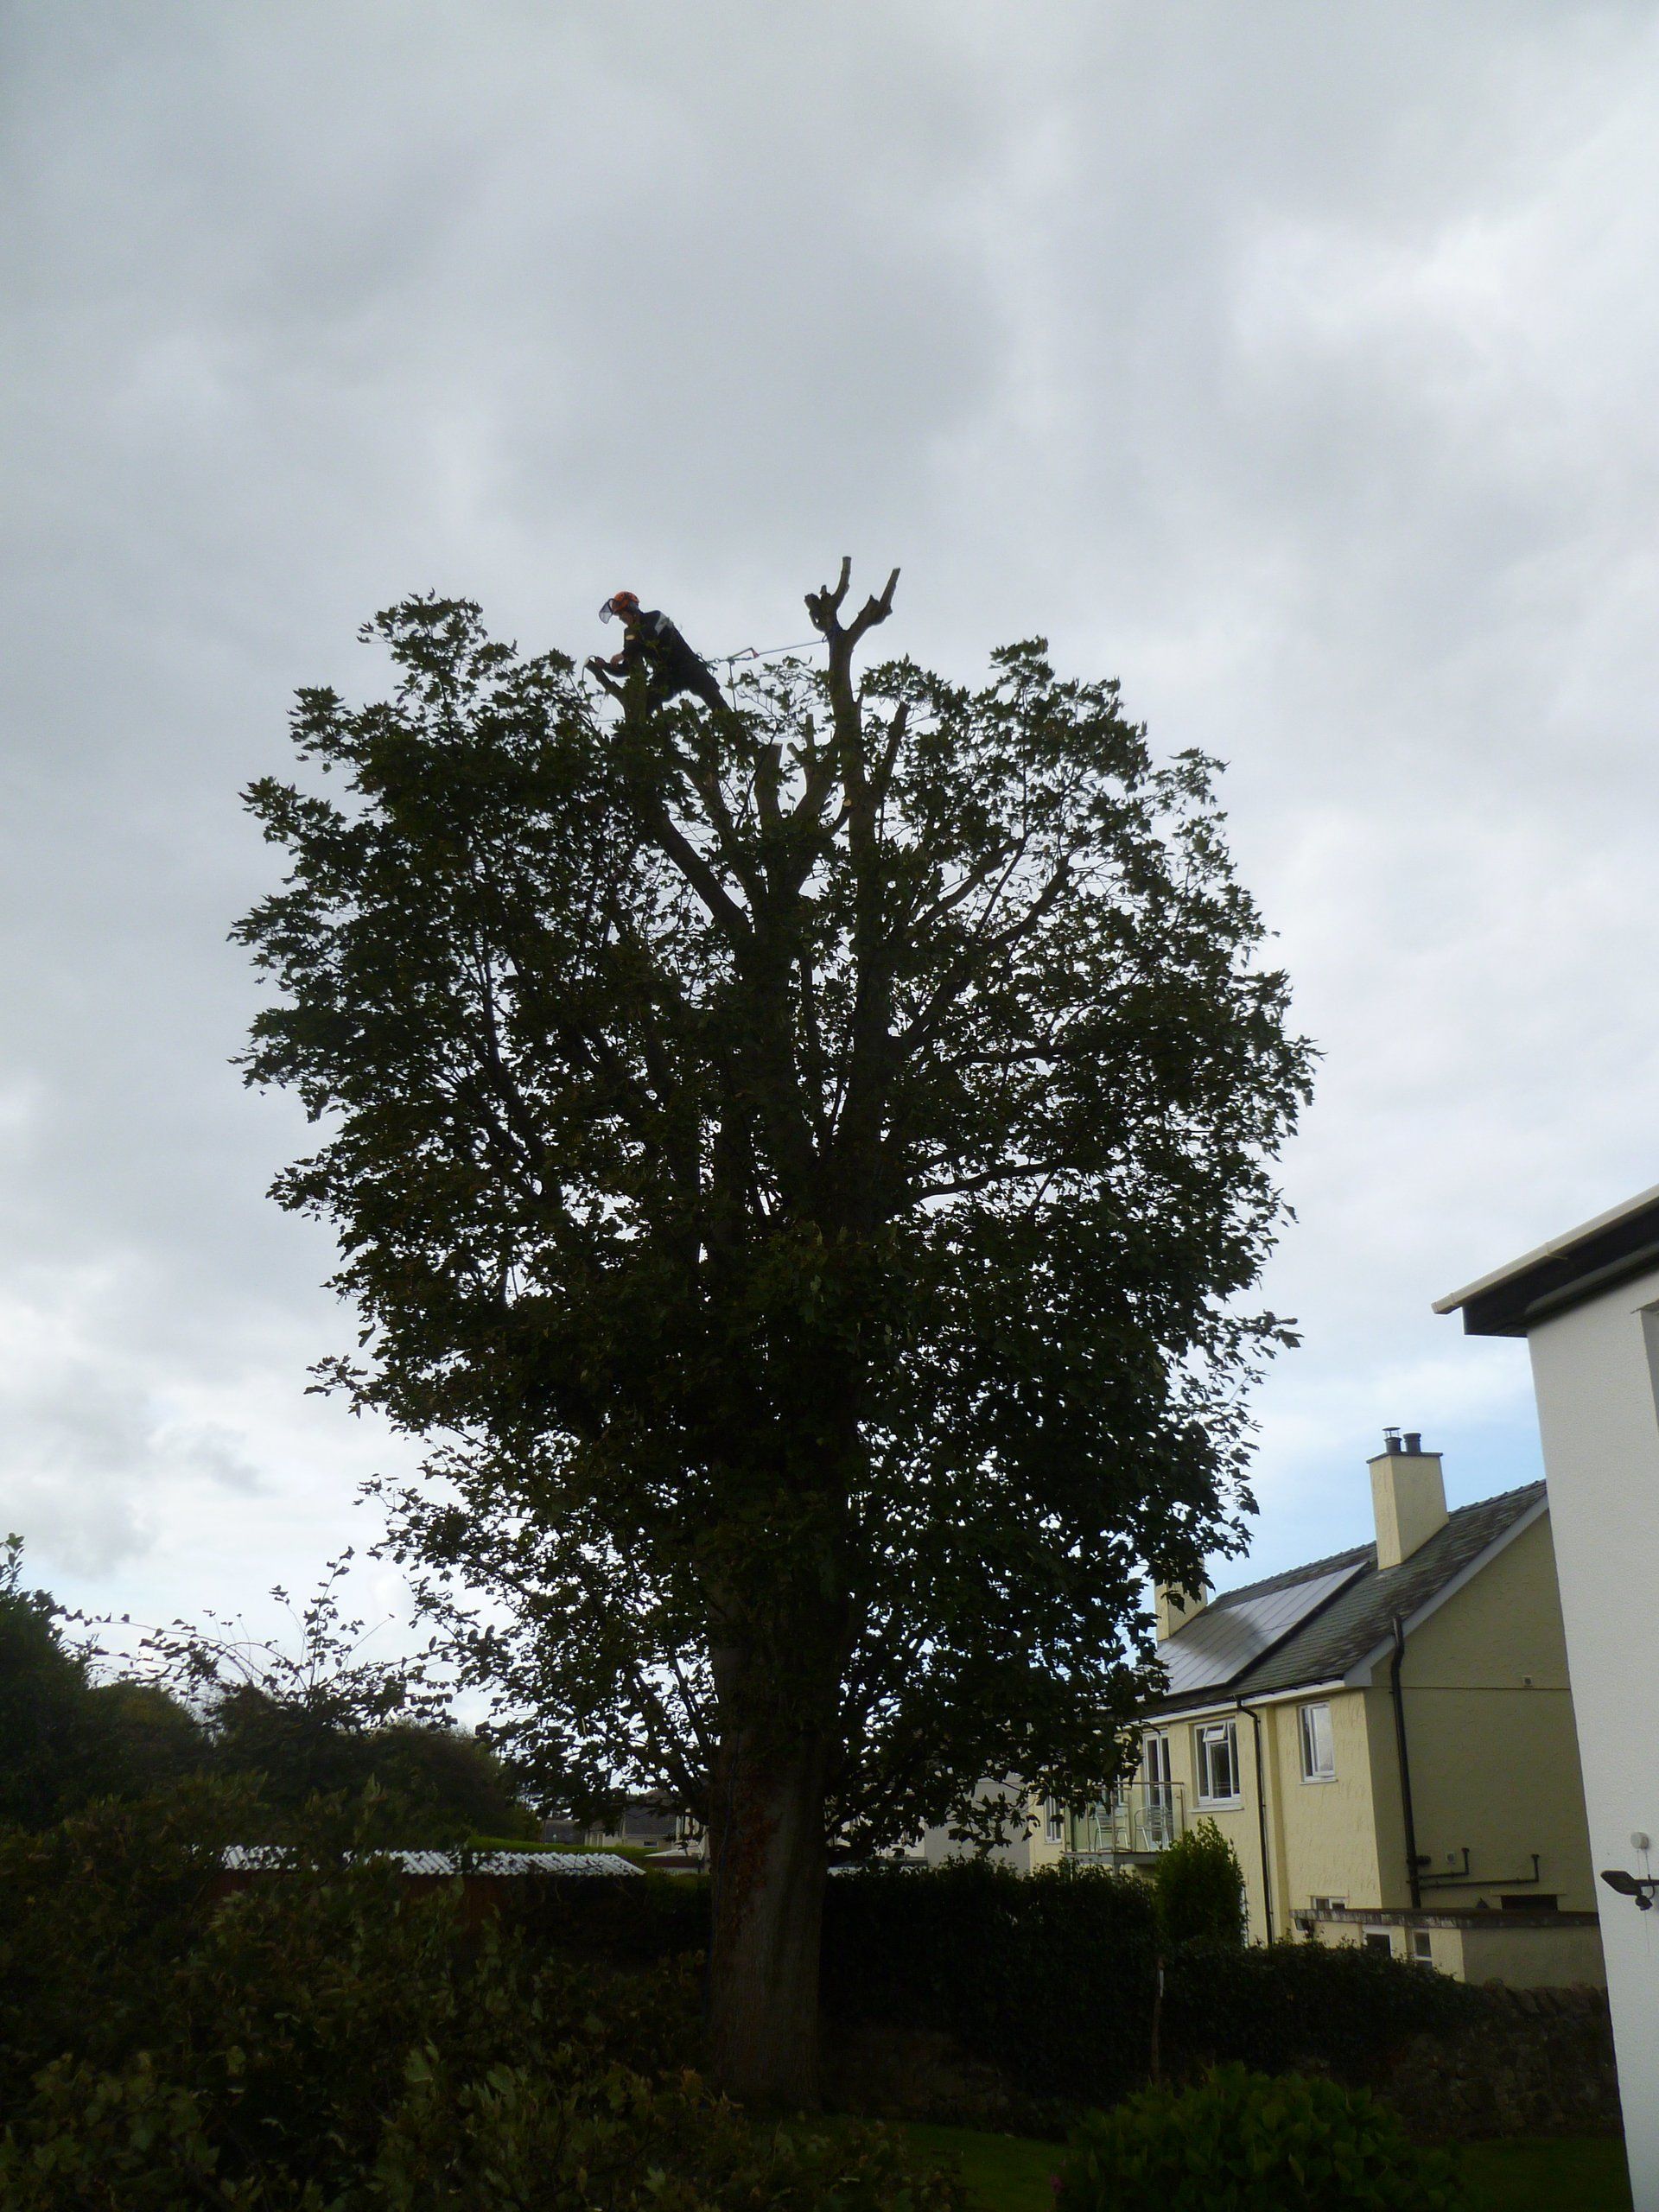 Crown reduction on a Chestnut tree.